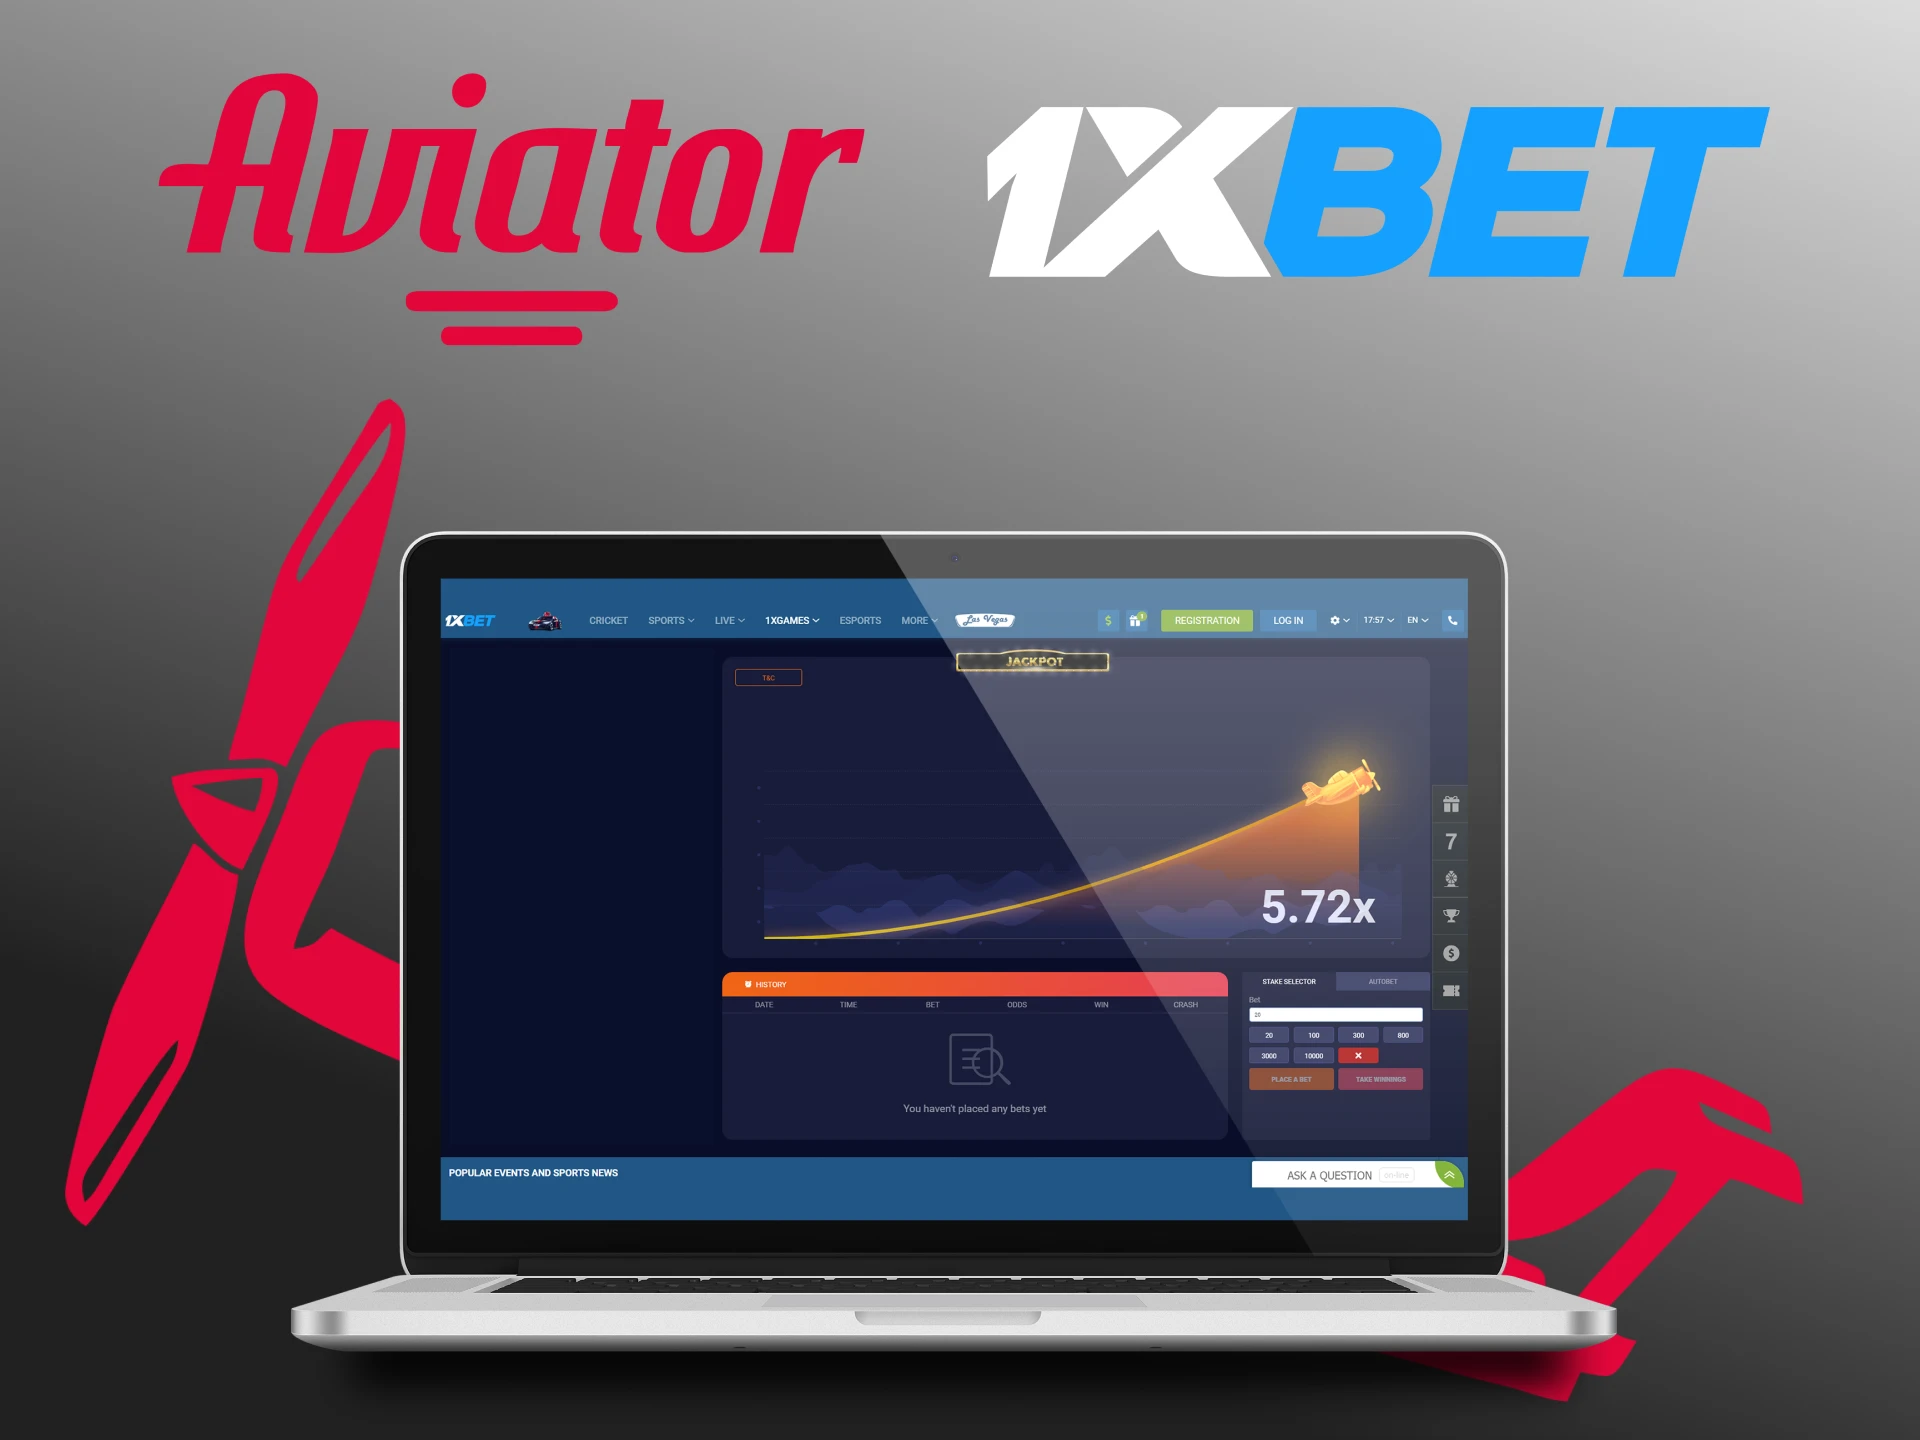 You can play the Aviator game on the 1xbet website.